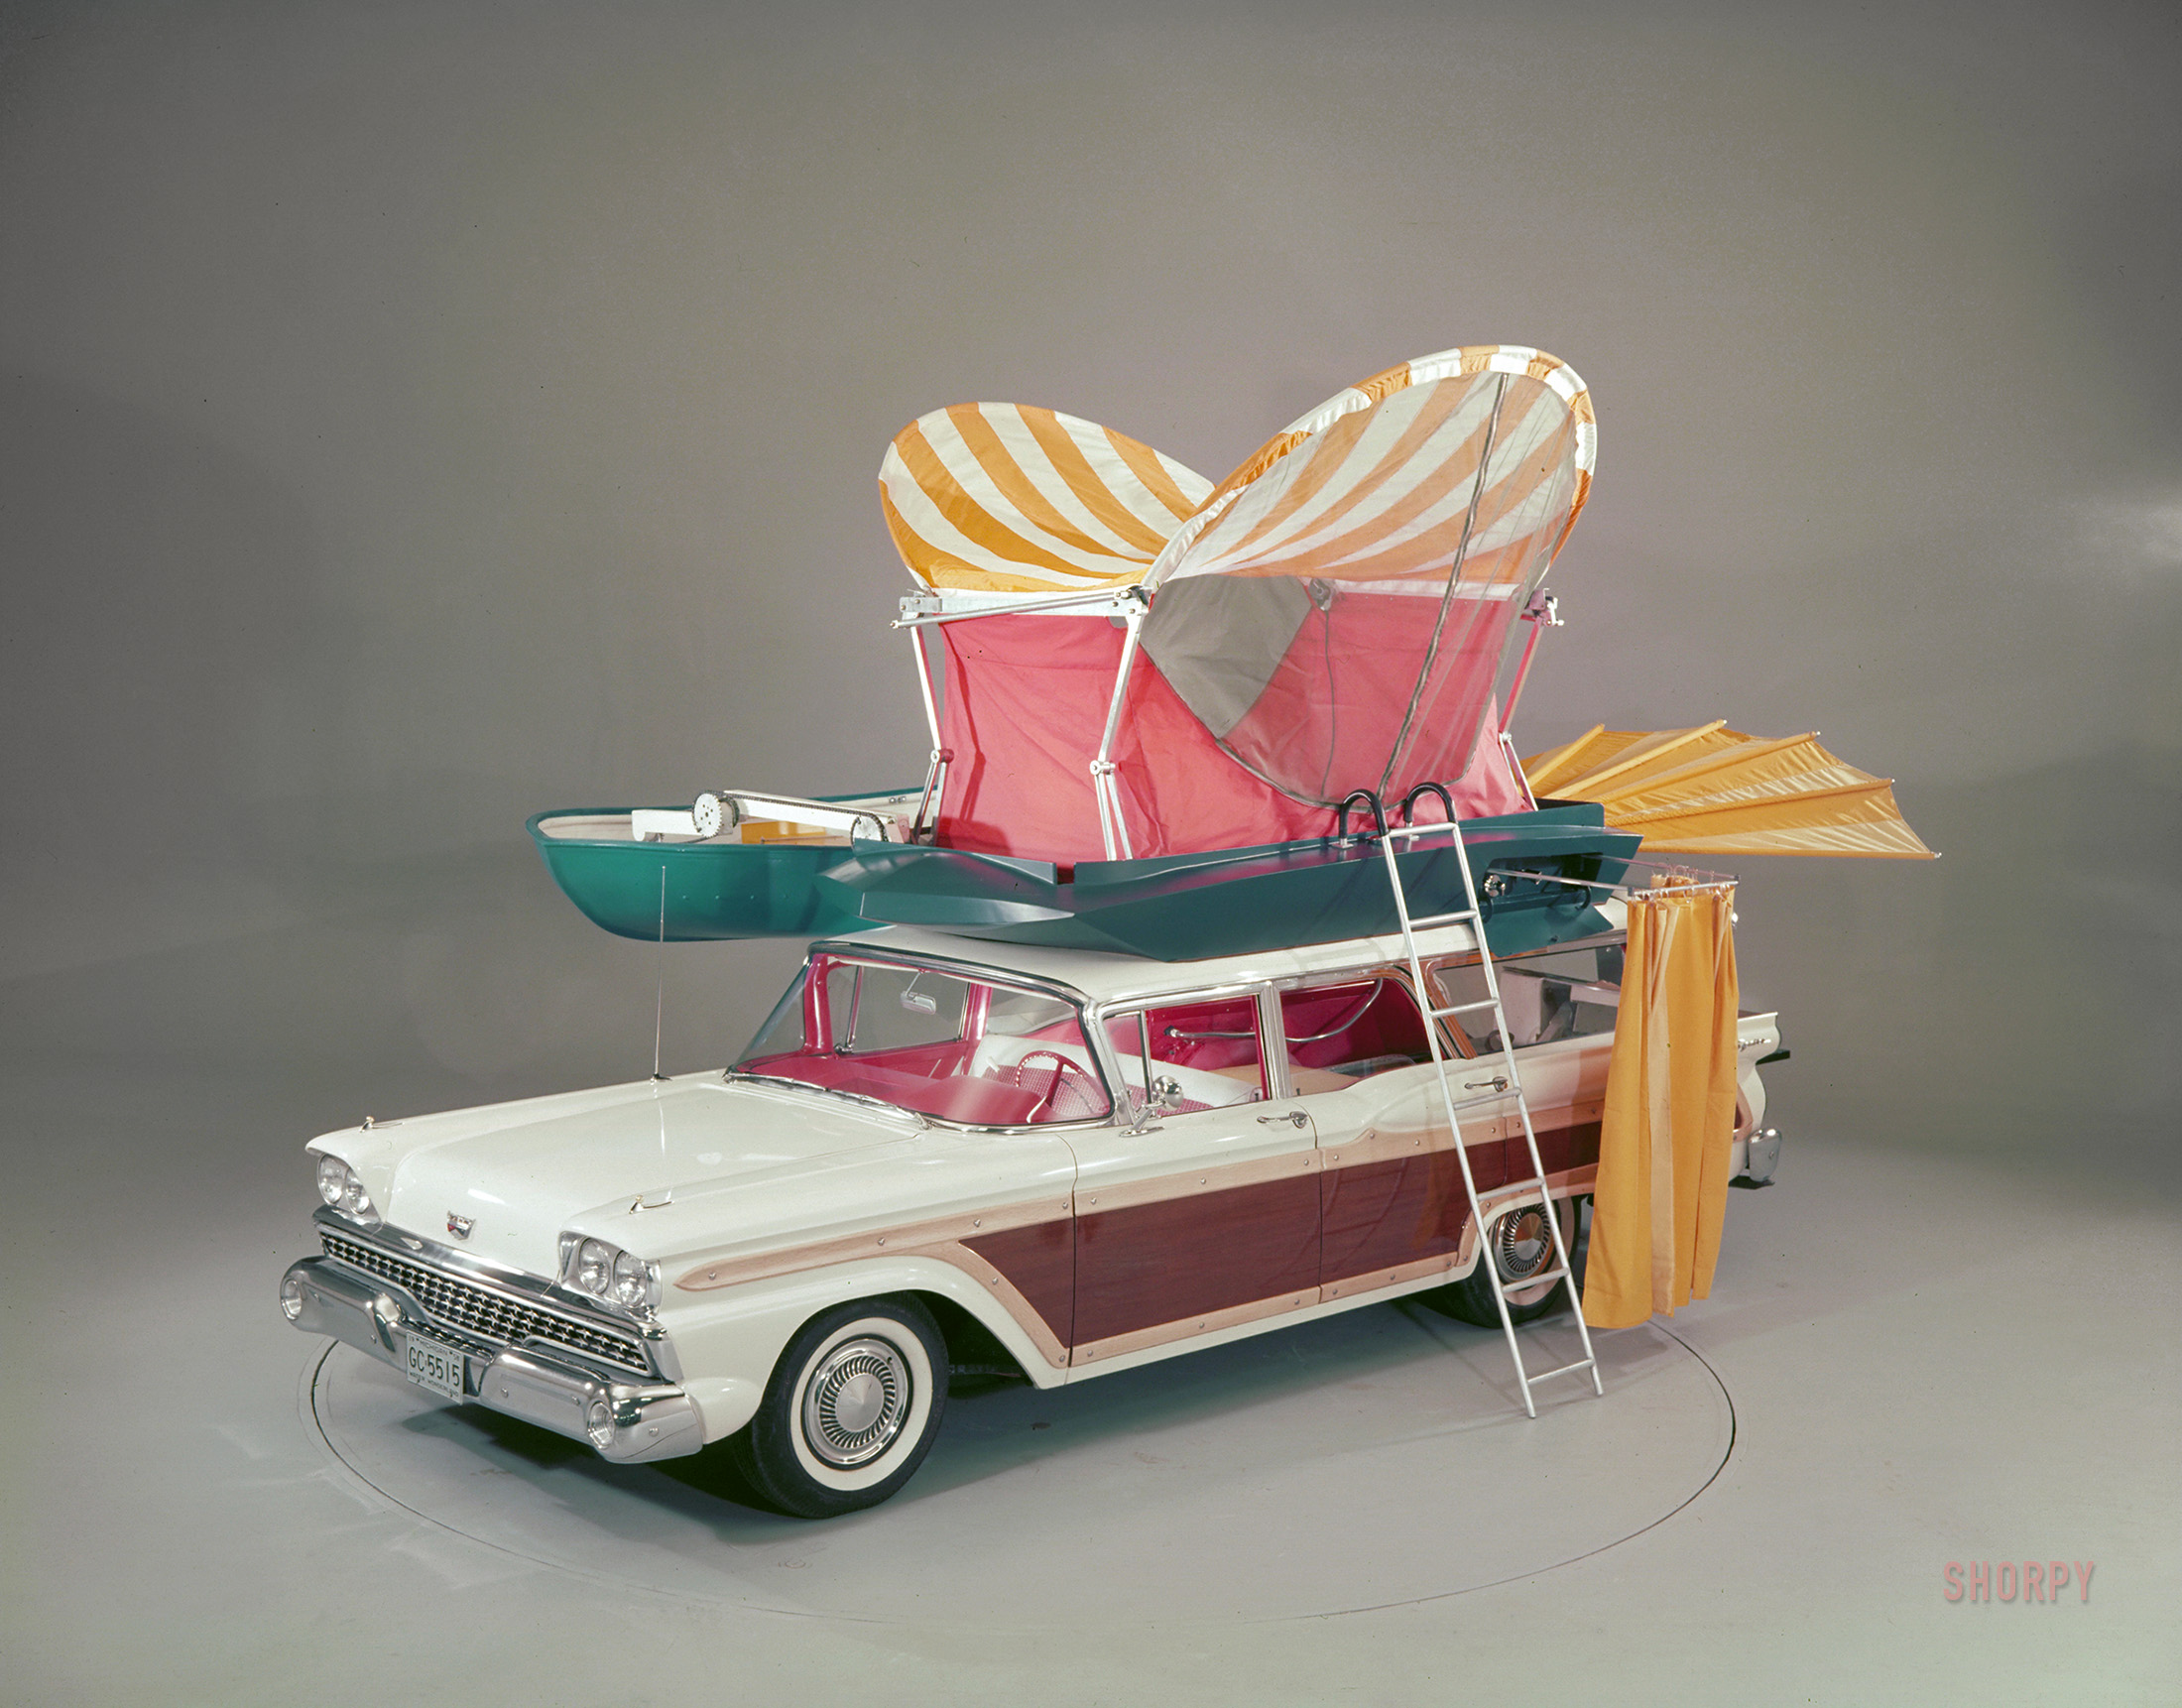 "1959 Ford Country Squire with pushbutton 'Station Wagon Living' equipment." Color transparency from the Ford Motor Co. photographic archive. View full size.
FORD WILL EXHIBIT PLUSH CAMP WAGON
&nbsp; &nbsp; &nbsp; &nbsp; In the experimental station wagon developed by Ford Motor Co., the outdoorsman with a strong push-button finger can set up camp without getting out of the car. First public showing of the easy-does-it camping equipment will be at Eastland Center in Harper Woods ... (Continue reading) 
-- News item, Detroit Free Press, 1958